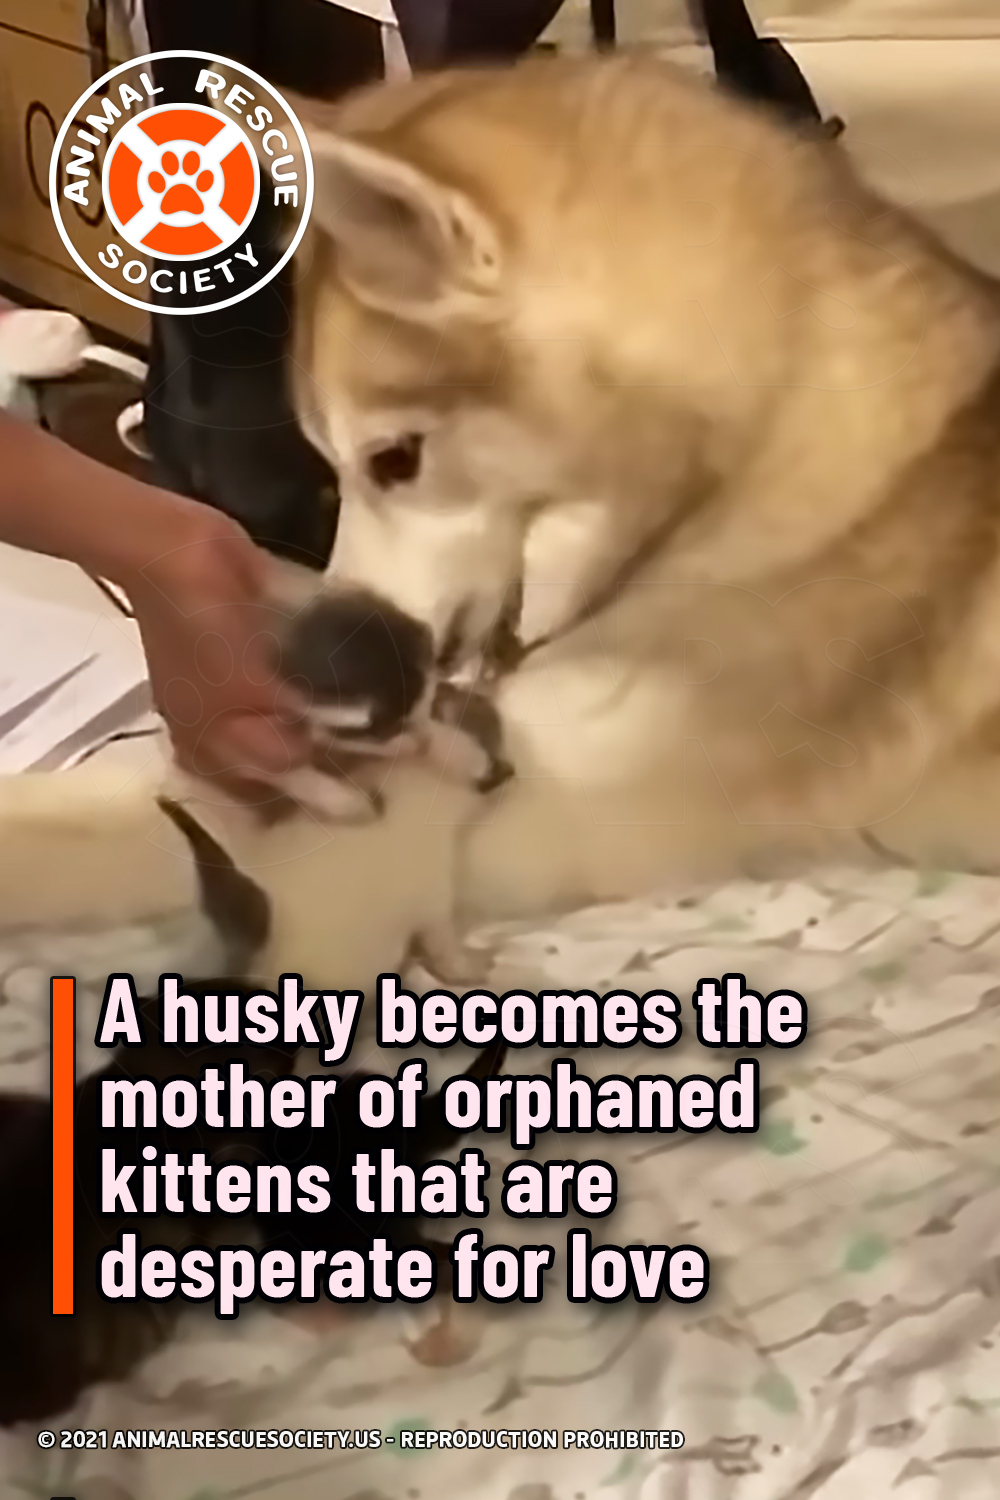 A husky becomes the mother of orphaned kittens that are desperate for love